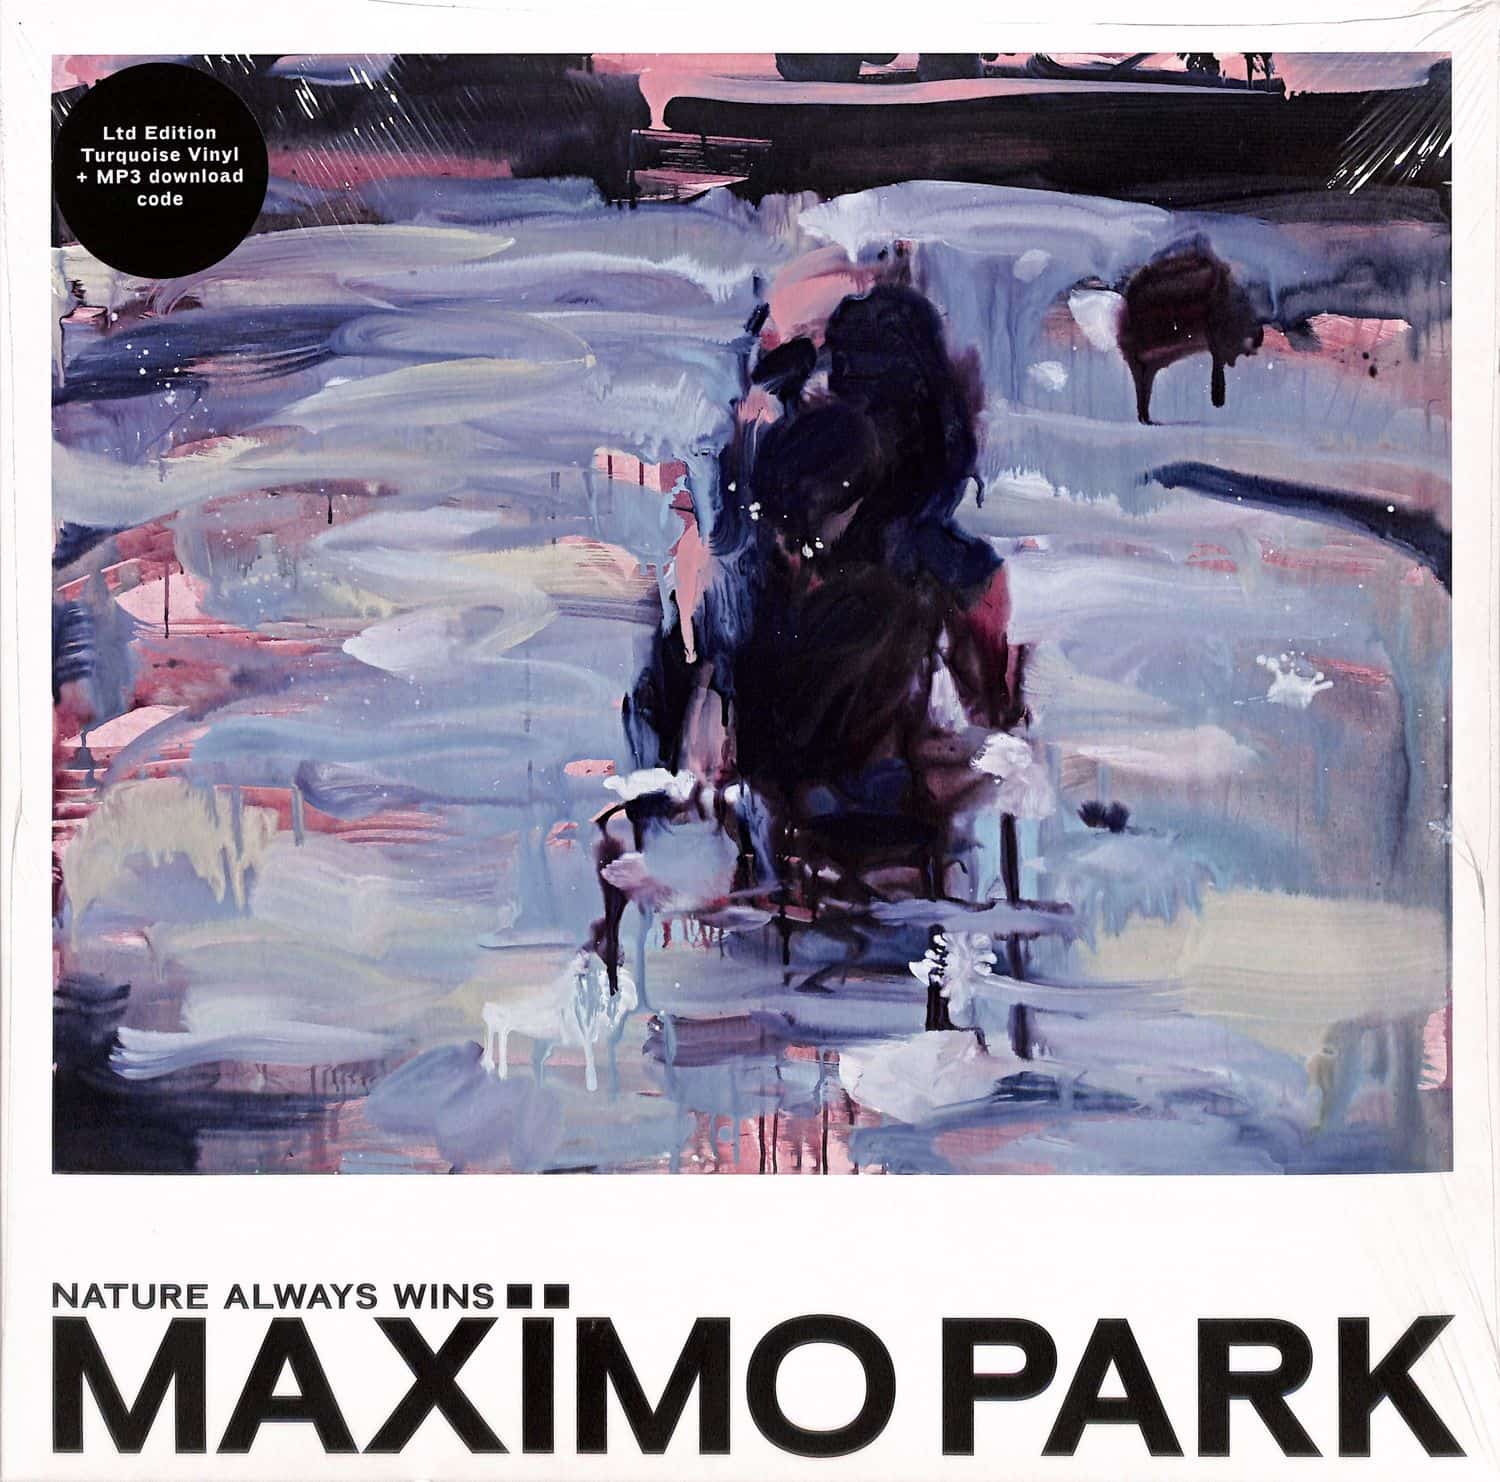 Maximo Park - NATURE ALWAYS WINS 